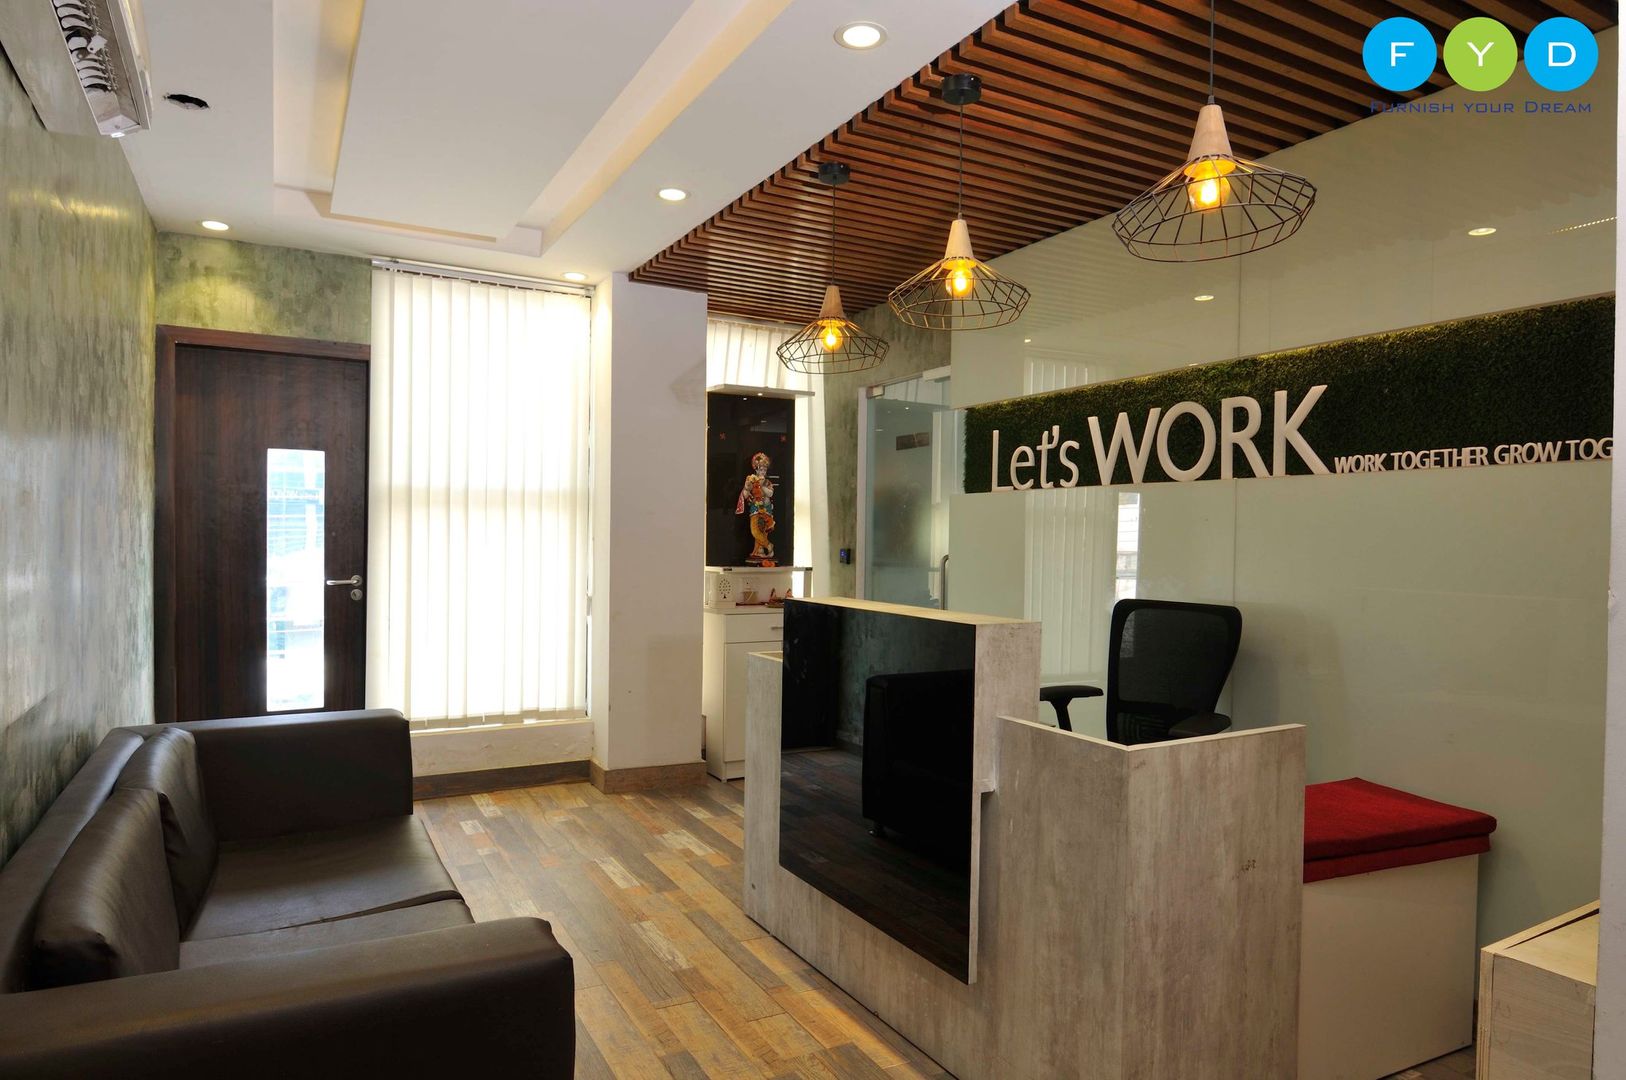 Lets Work - Coworking Space in Noida FYD Interiors Pvt. Ltd Commercial spaces coworking space,office,office interiors,interior design,Offices & stores